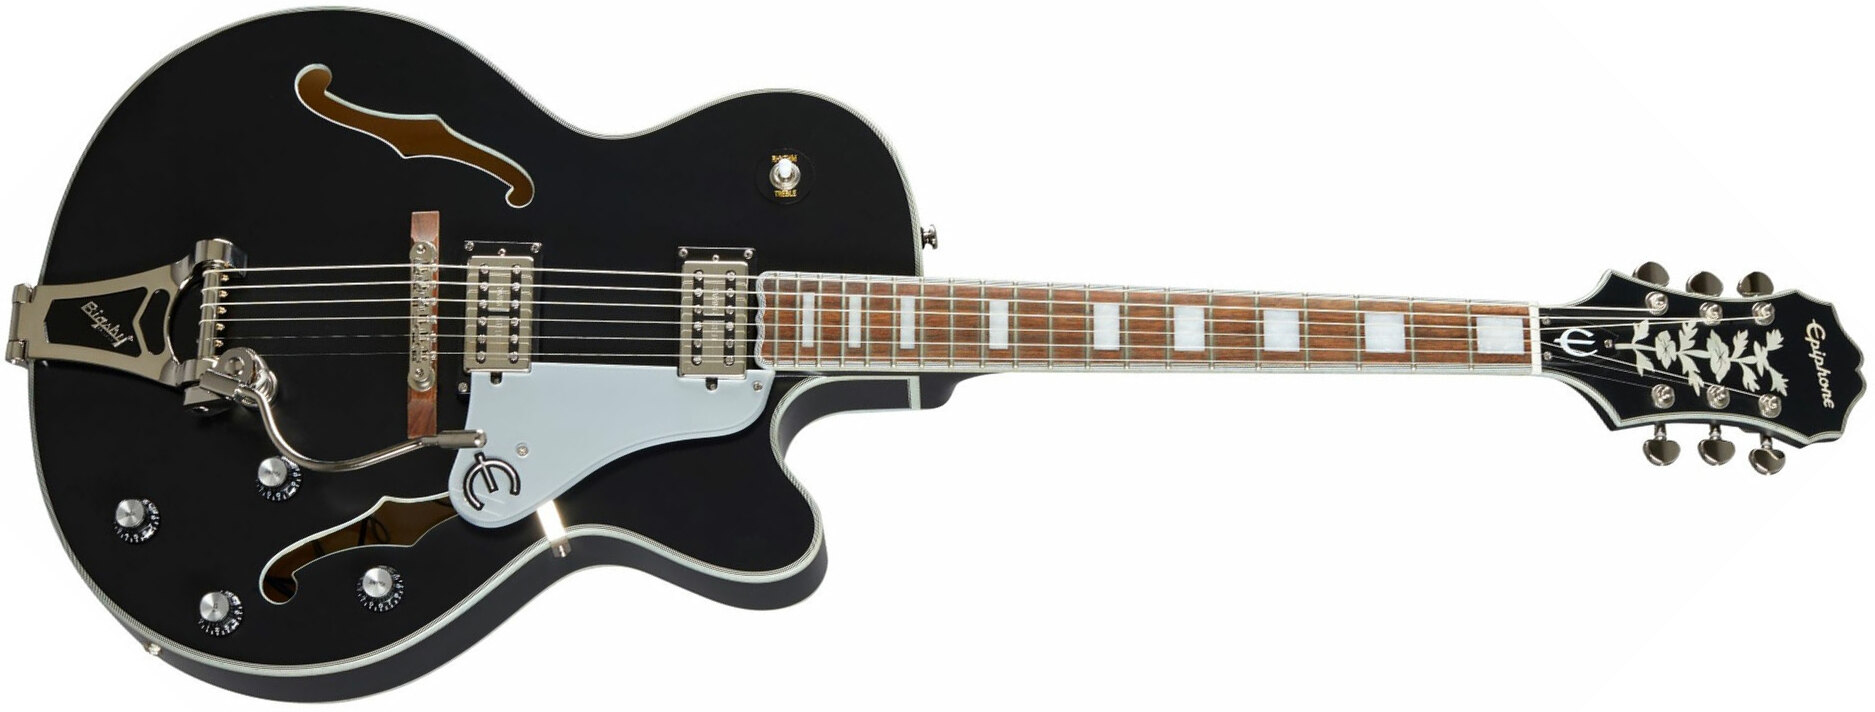 Epiphone Emperor Swingster - black aged gloss Hollow-body electric